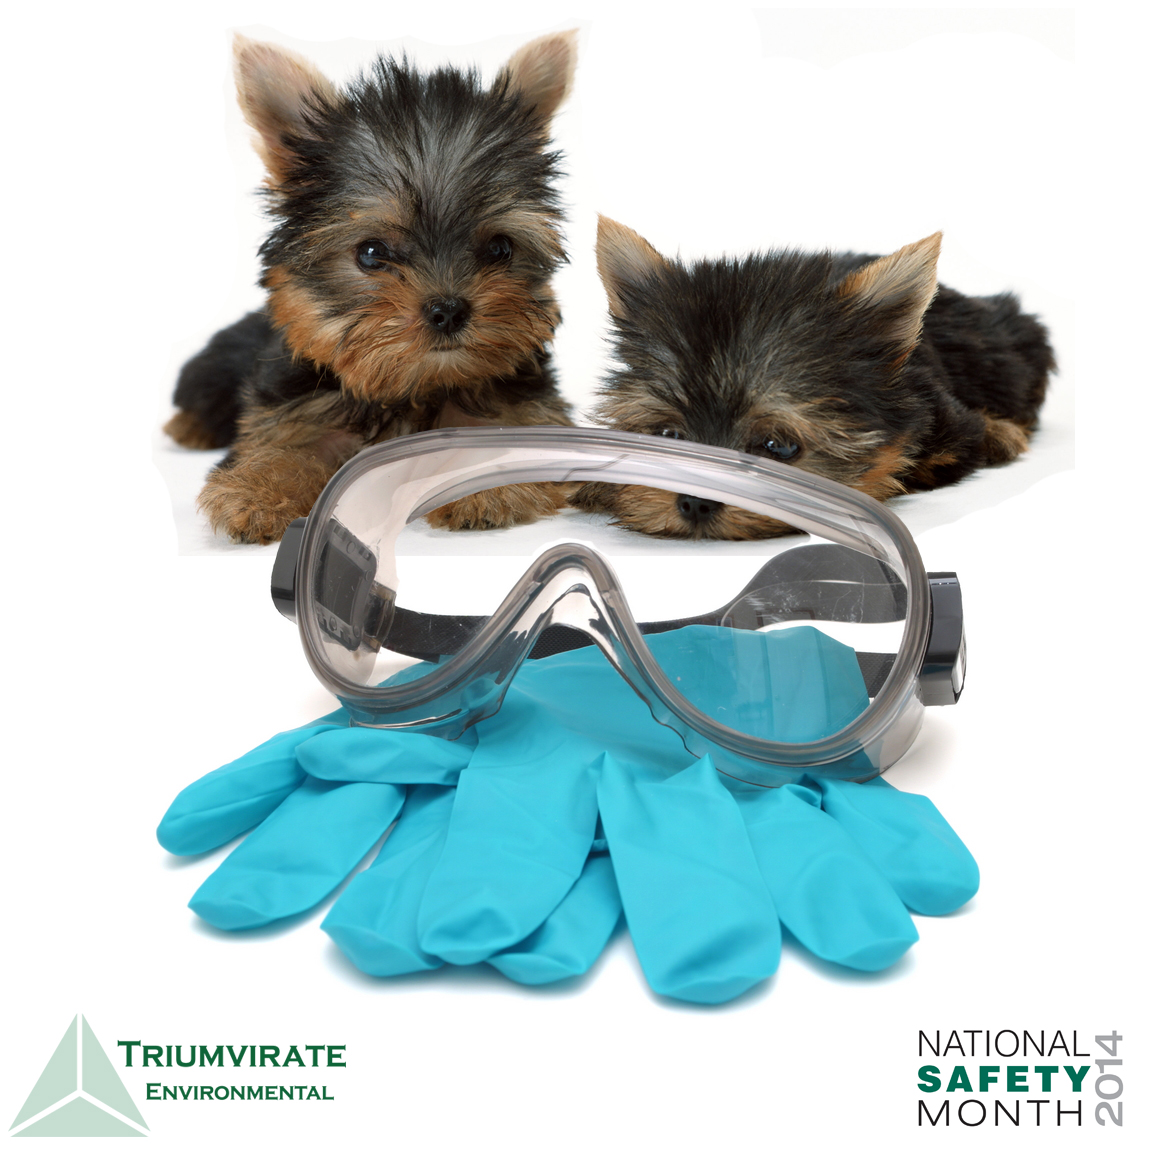 If puppies can wear personal protective equipment, so can you!